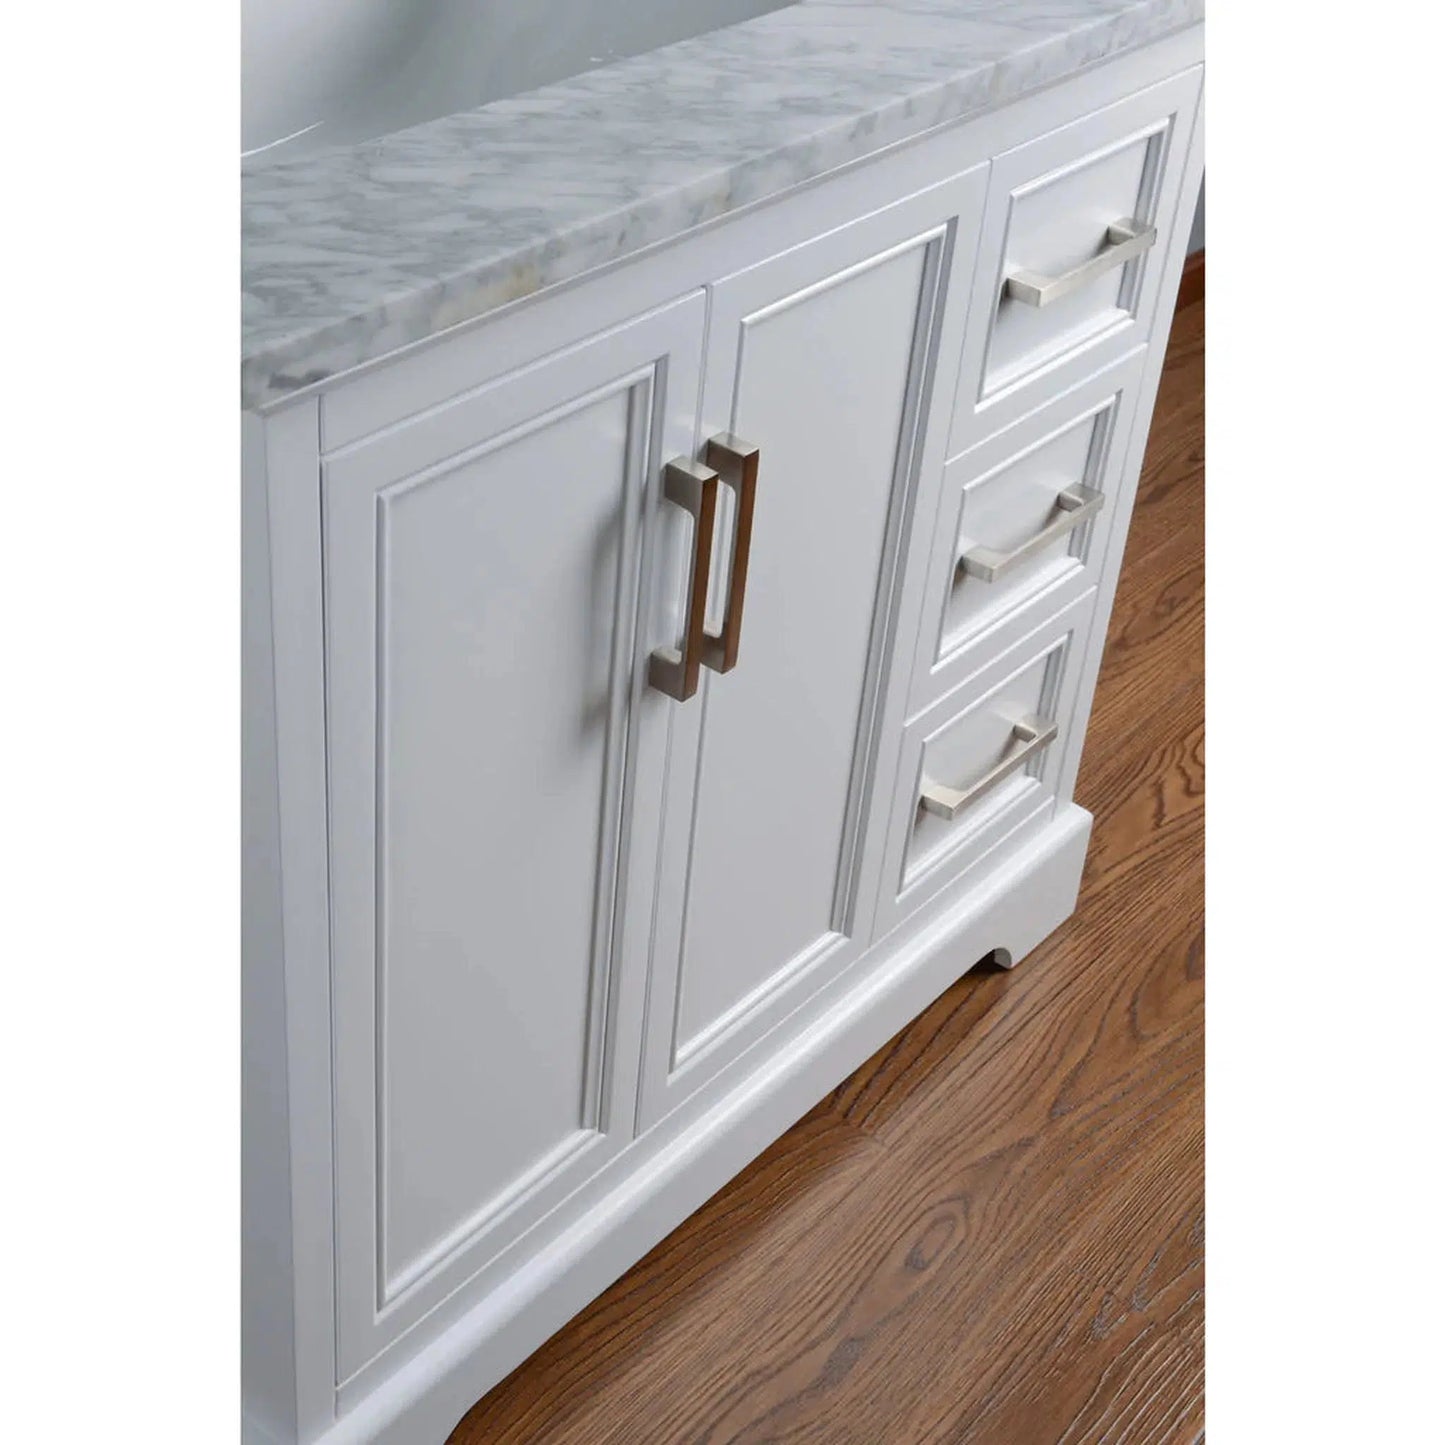 Stufurhome Ariane 36" White Marble Countertop Vanity Cabinet With Single Sink, 3 Drawers, 2 Doors and Widespread Faucet Holes